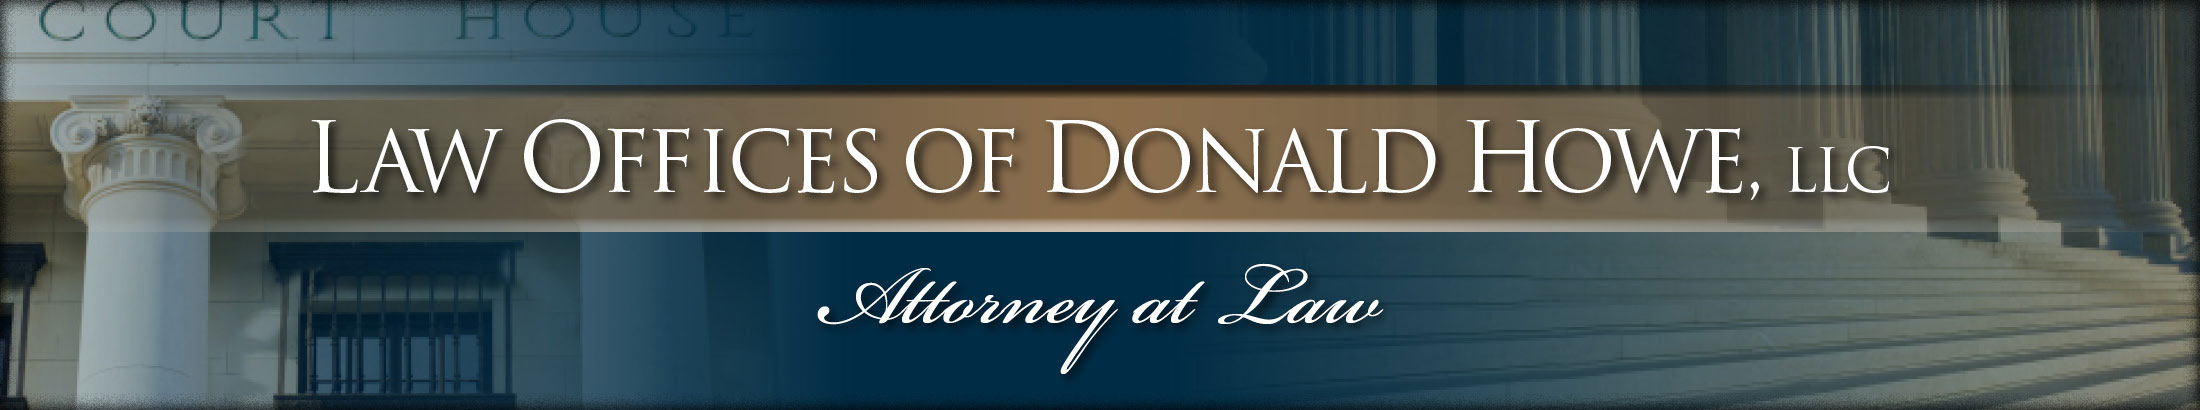 Law Offices of Donald Howe, LLC Logo